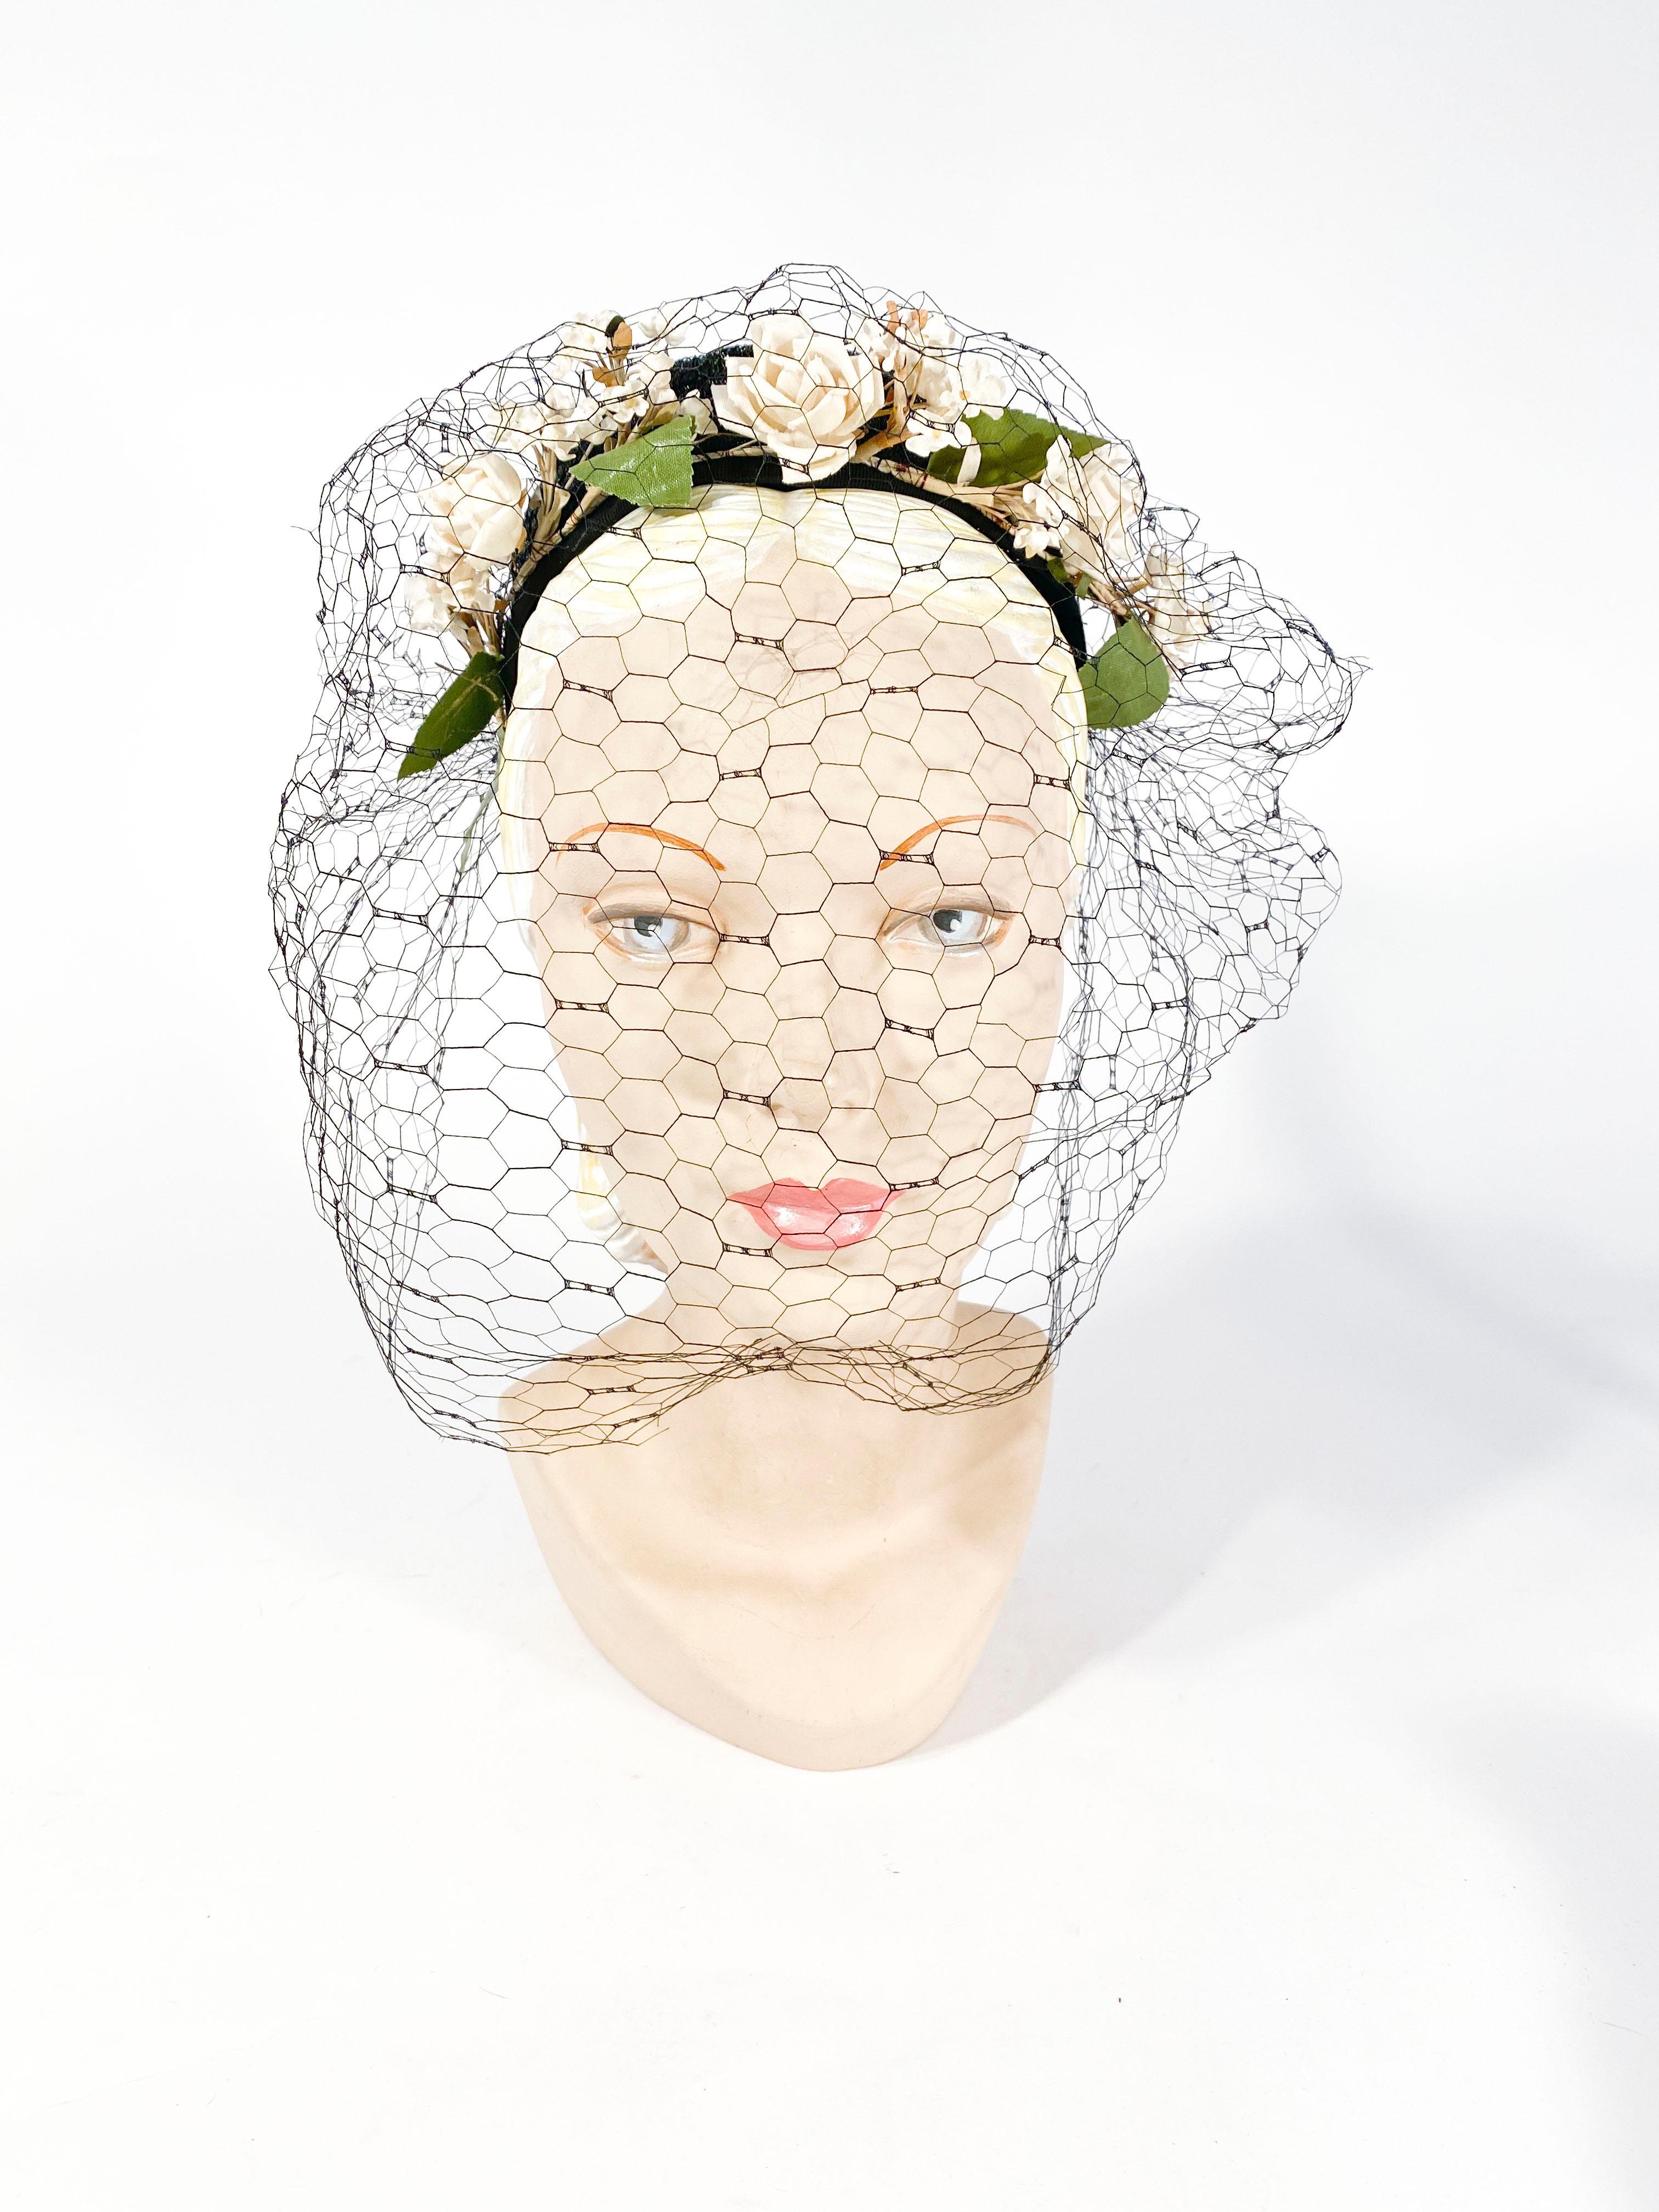 1940s black coated and woven straw hat with a wreath of off-white flowers garnished with green leaves and a full face veil 